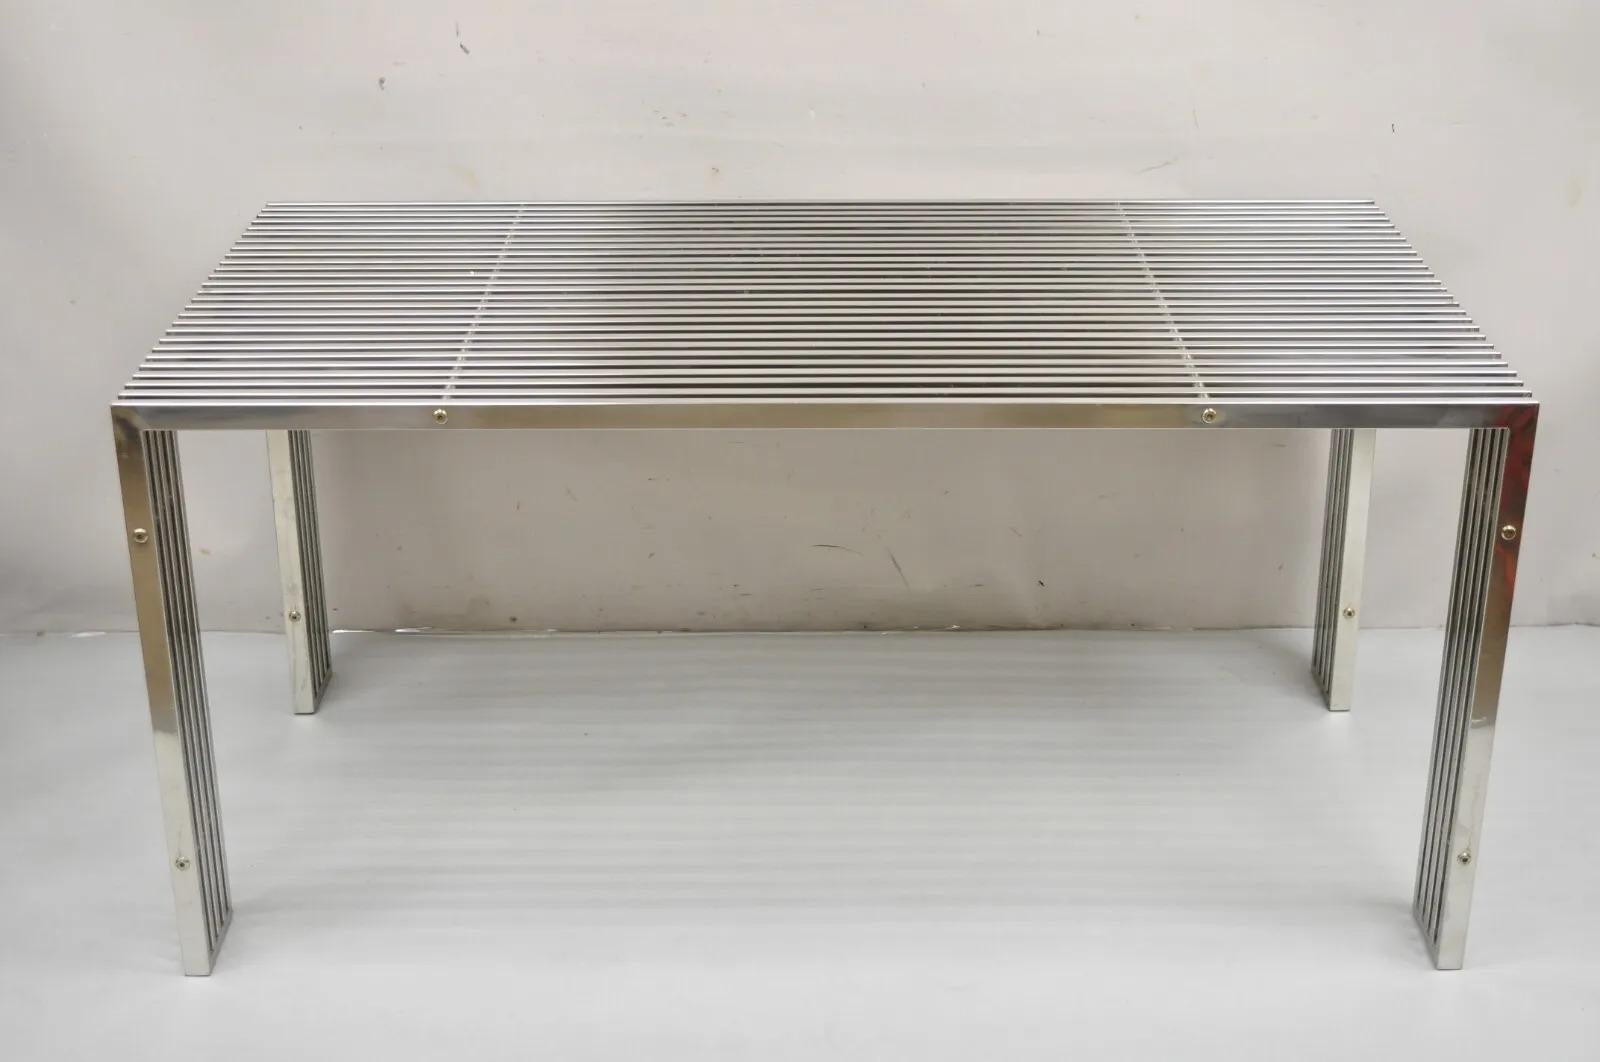 Contemporary Modern Gridiron Stainless Steel Metal Post-Modern Dining Table Desk. Item features a sleek stainless steel construction, clean modern lines, great style and form. *Does not include a glass top. Circa 21st Century, Pre-owned.